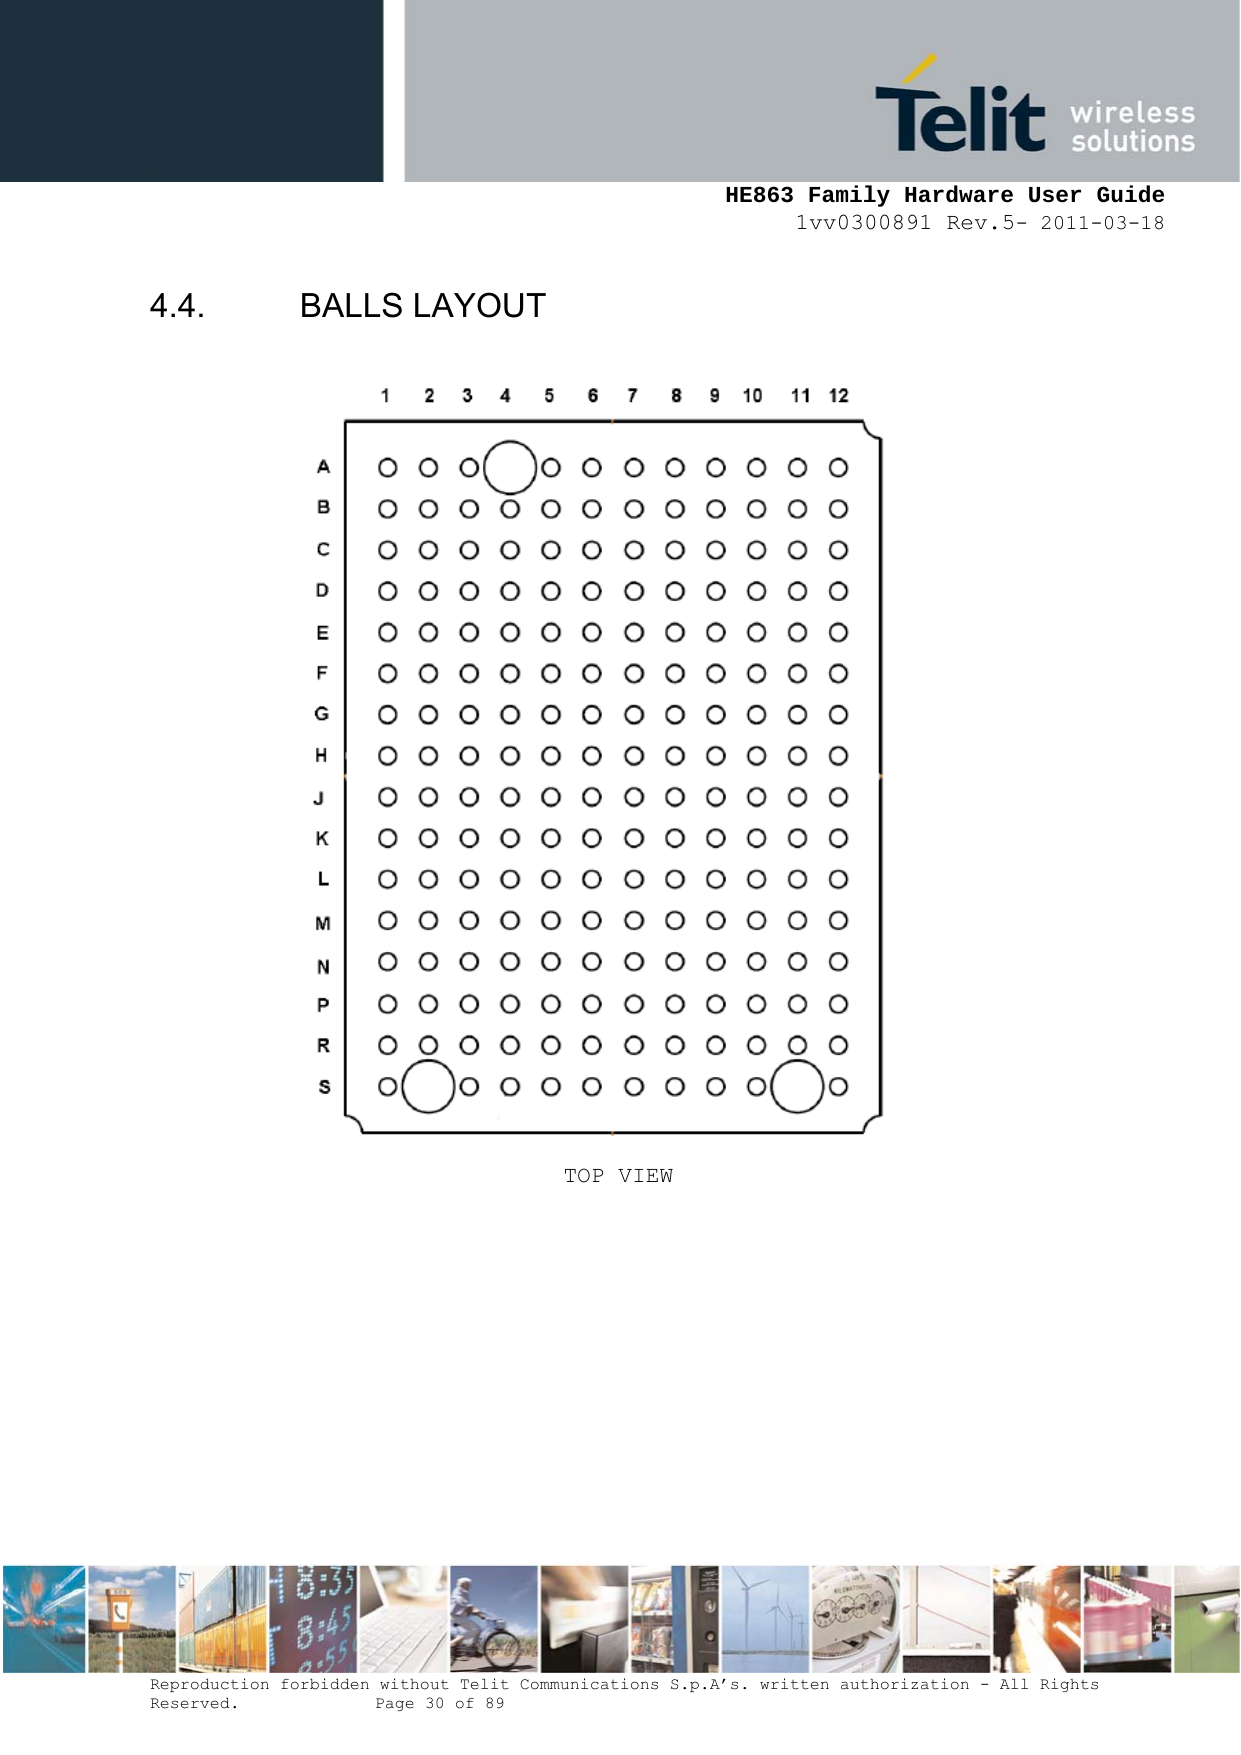     HE863 Family Hardware User Guide 1vv0300891 Rev.5- 2011-03-18    Reproduction forbidden without Telit Communications S.p.A’s. written authorization - All Rights Reserved.    Page 30 of 89  4.4. BALLS LAYOUT   TOP VIEW 